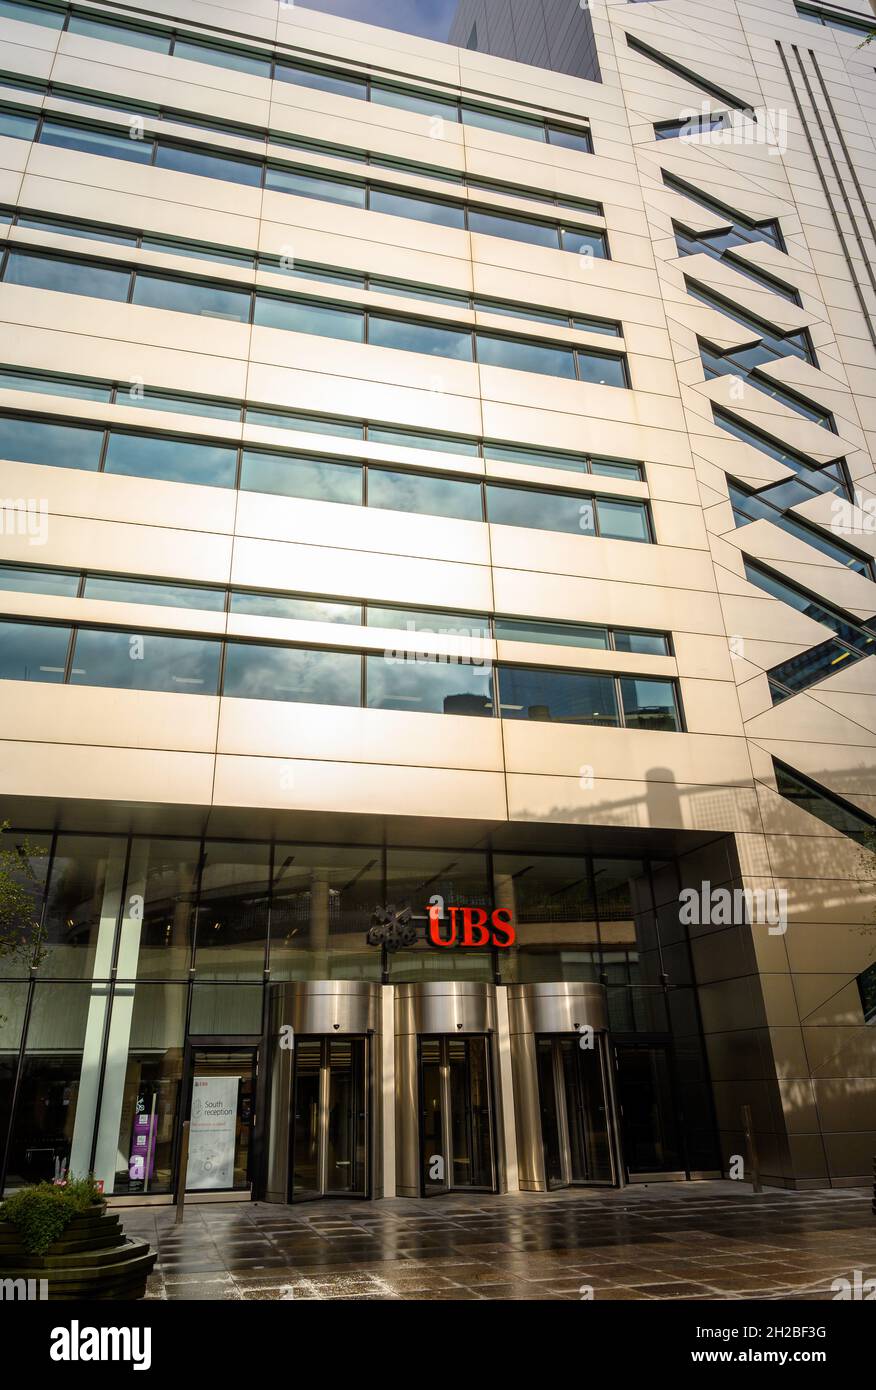 Part of the fron facade and the entrance to UBS AG bank's building at 5 Broadgate, London, England. Stock Photo